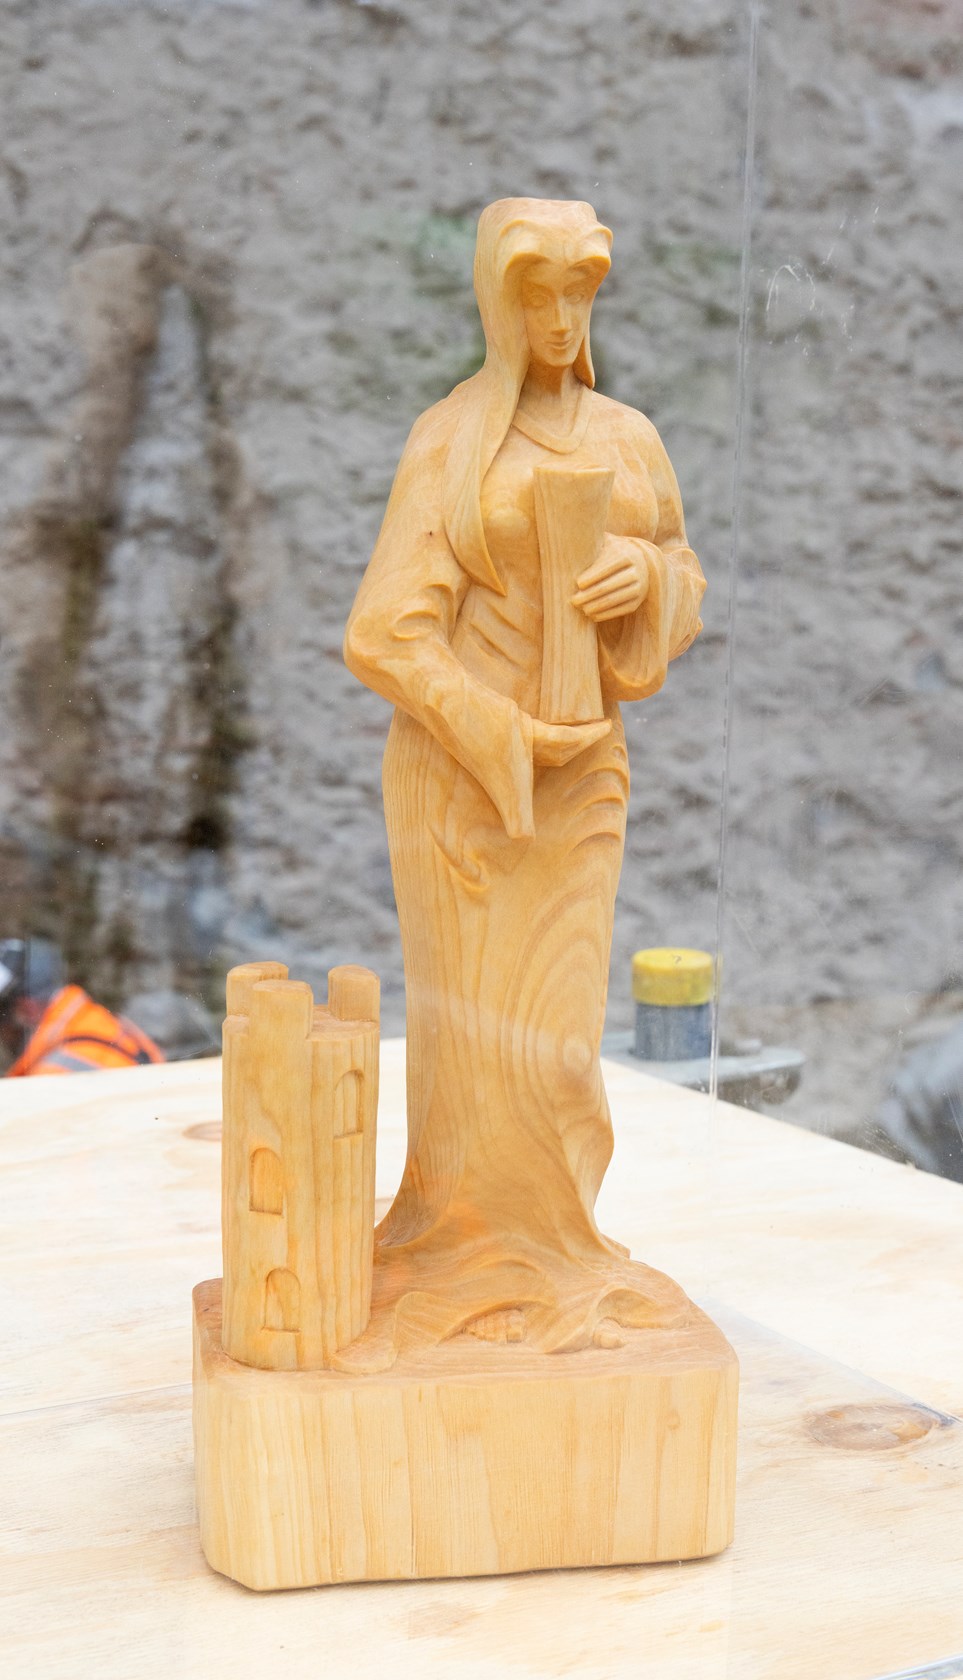 Statue of St Barbara - Patron Saint of Tunnel blessed at Victoria Road Crossover Box before next two TBMs are launched: The statue of St Barbara, the Patron Saint of Tunnellers and Miners. 
The statue will be displayed at the tunnel portal, to bring safety to workers underground.